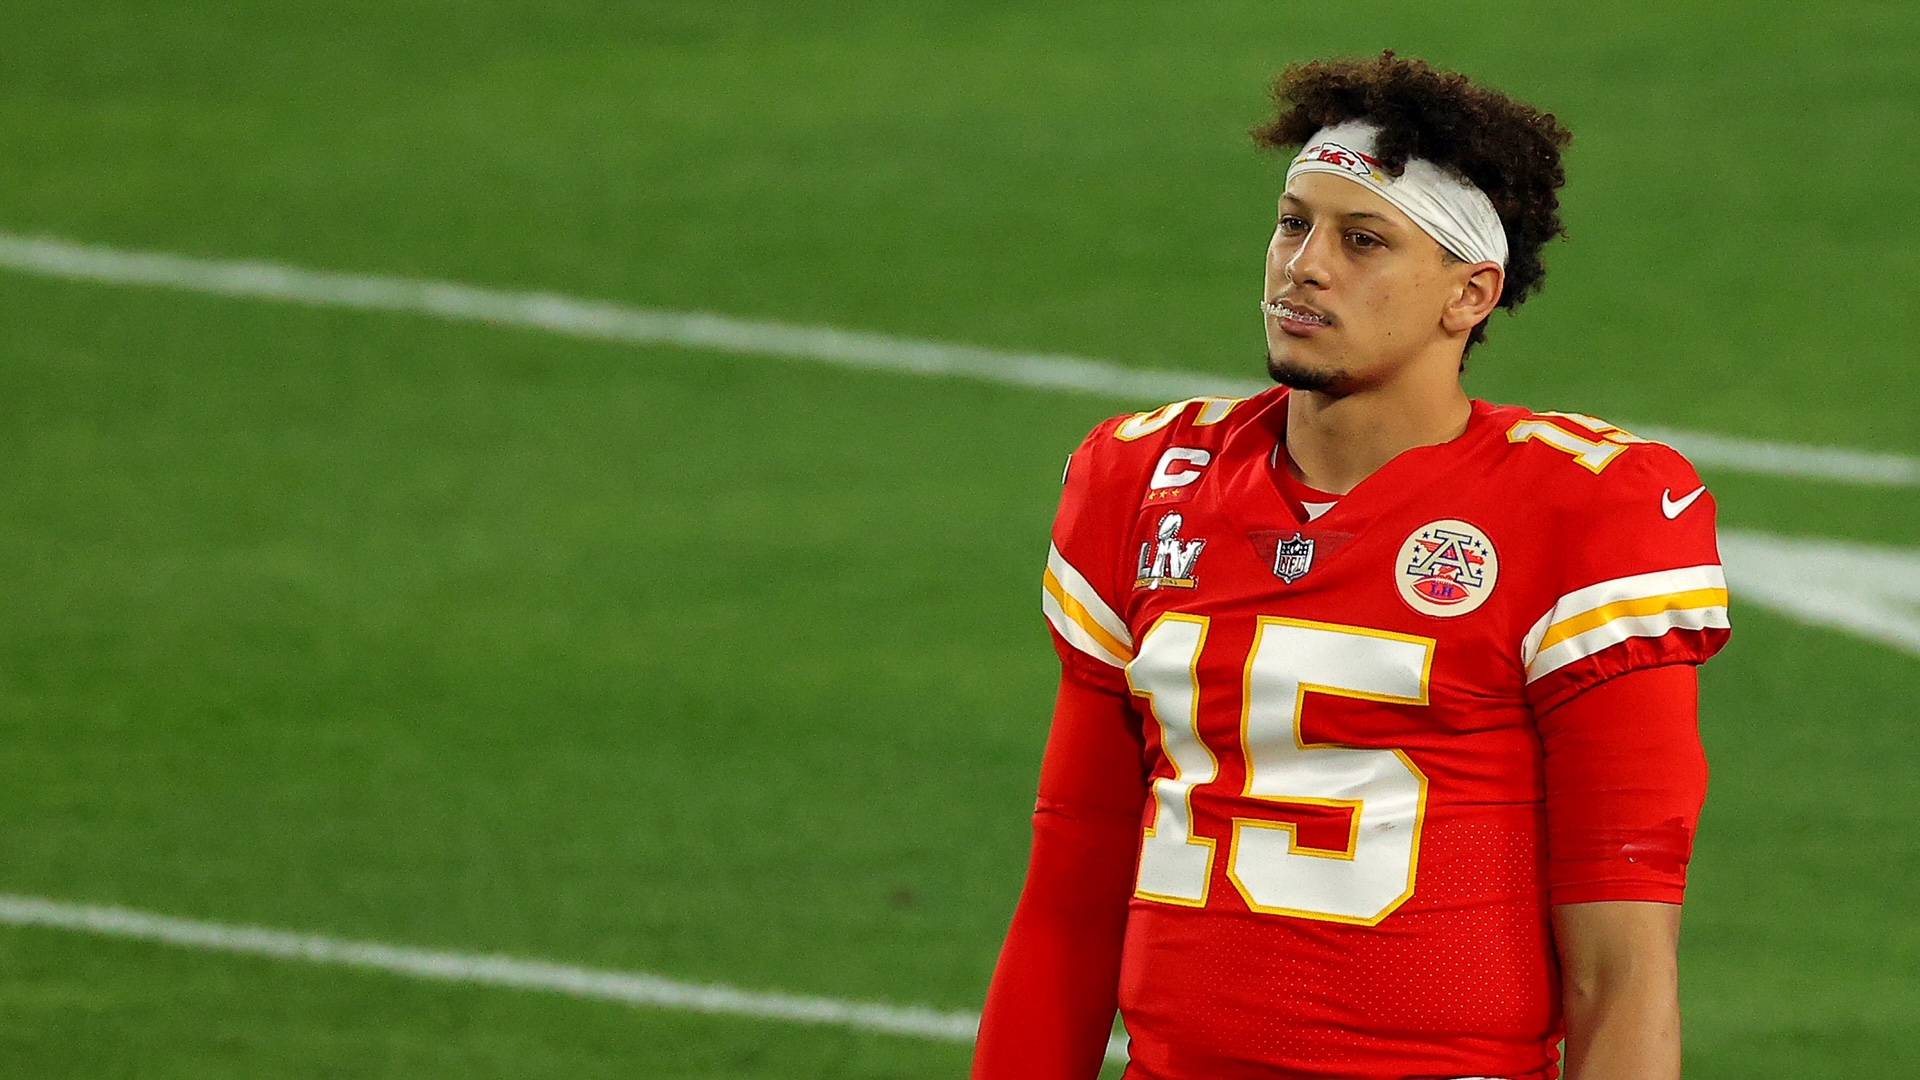 Patrick Mahomes' Brother Jackson Arrested for Alleged Sexual Battery